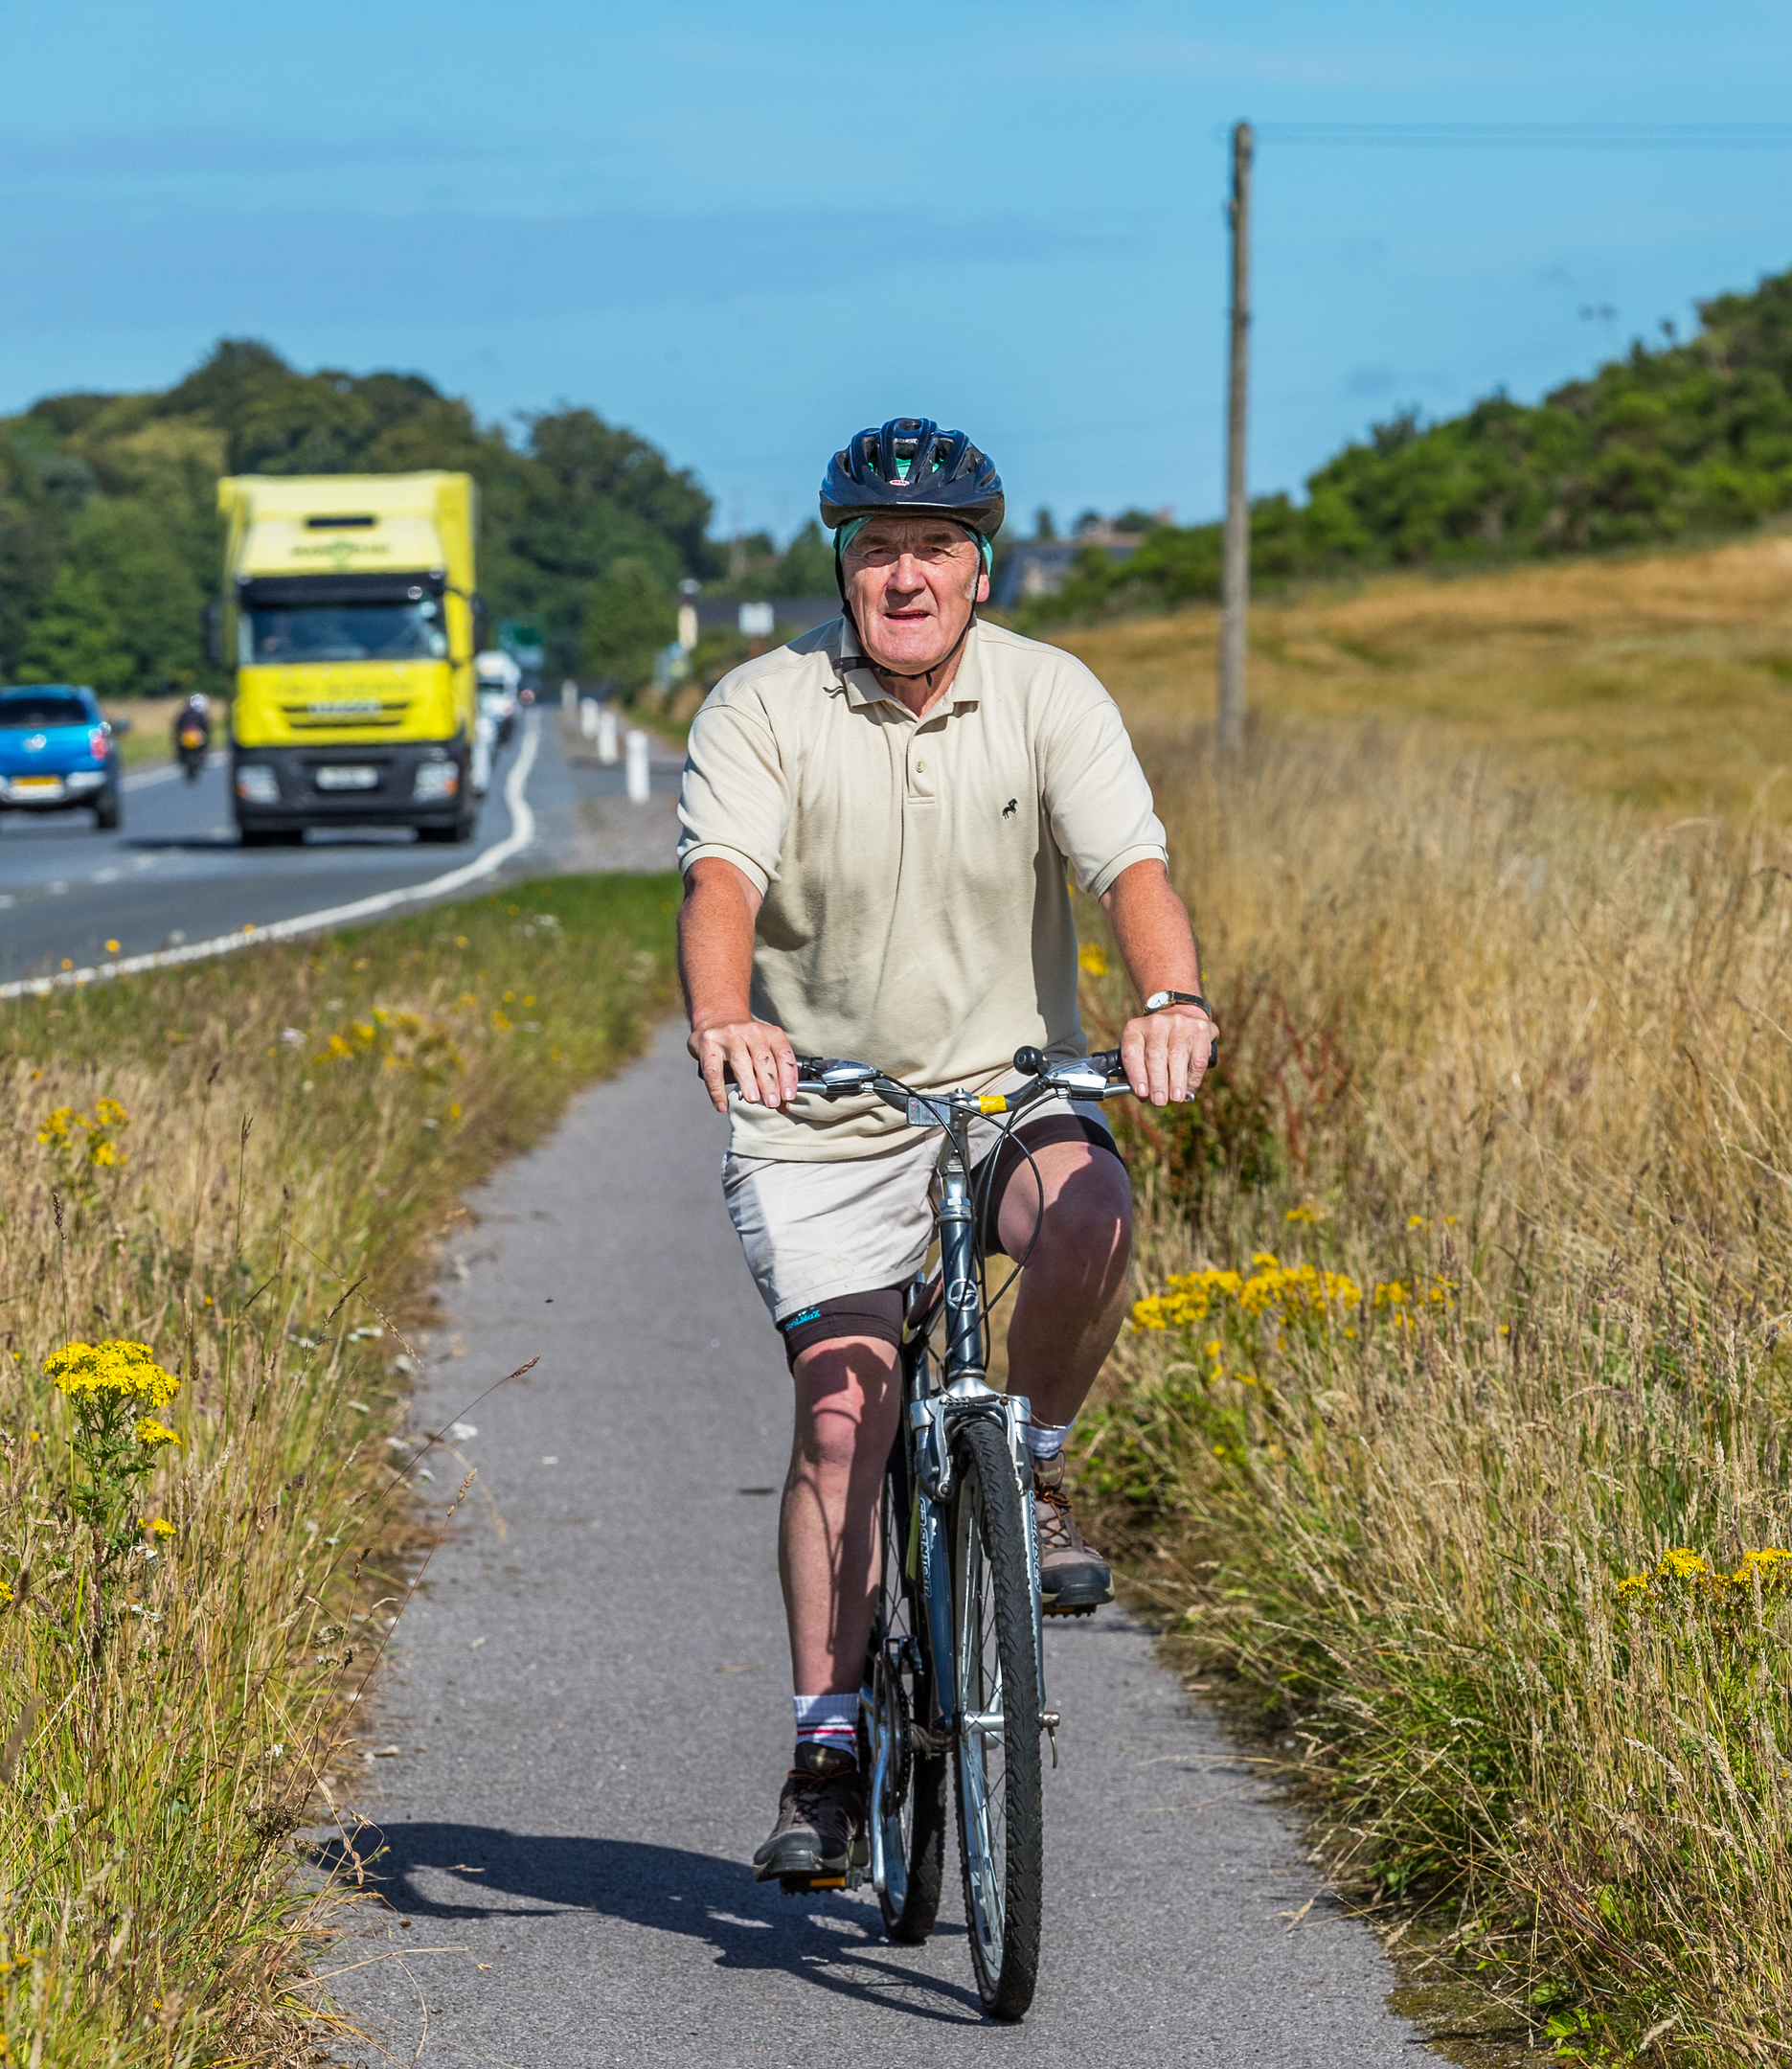 Council leader George Alexander cycled from Forres to the meeting to show his support for the plans